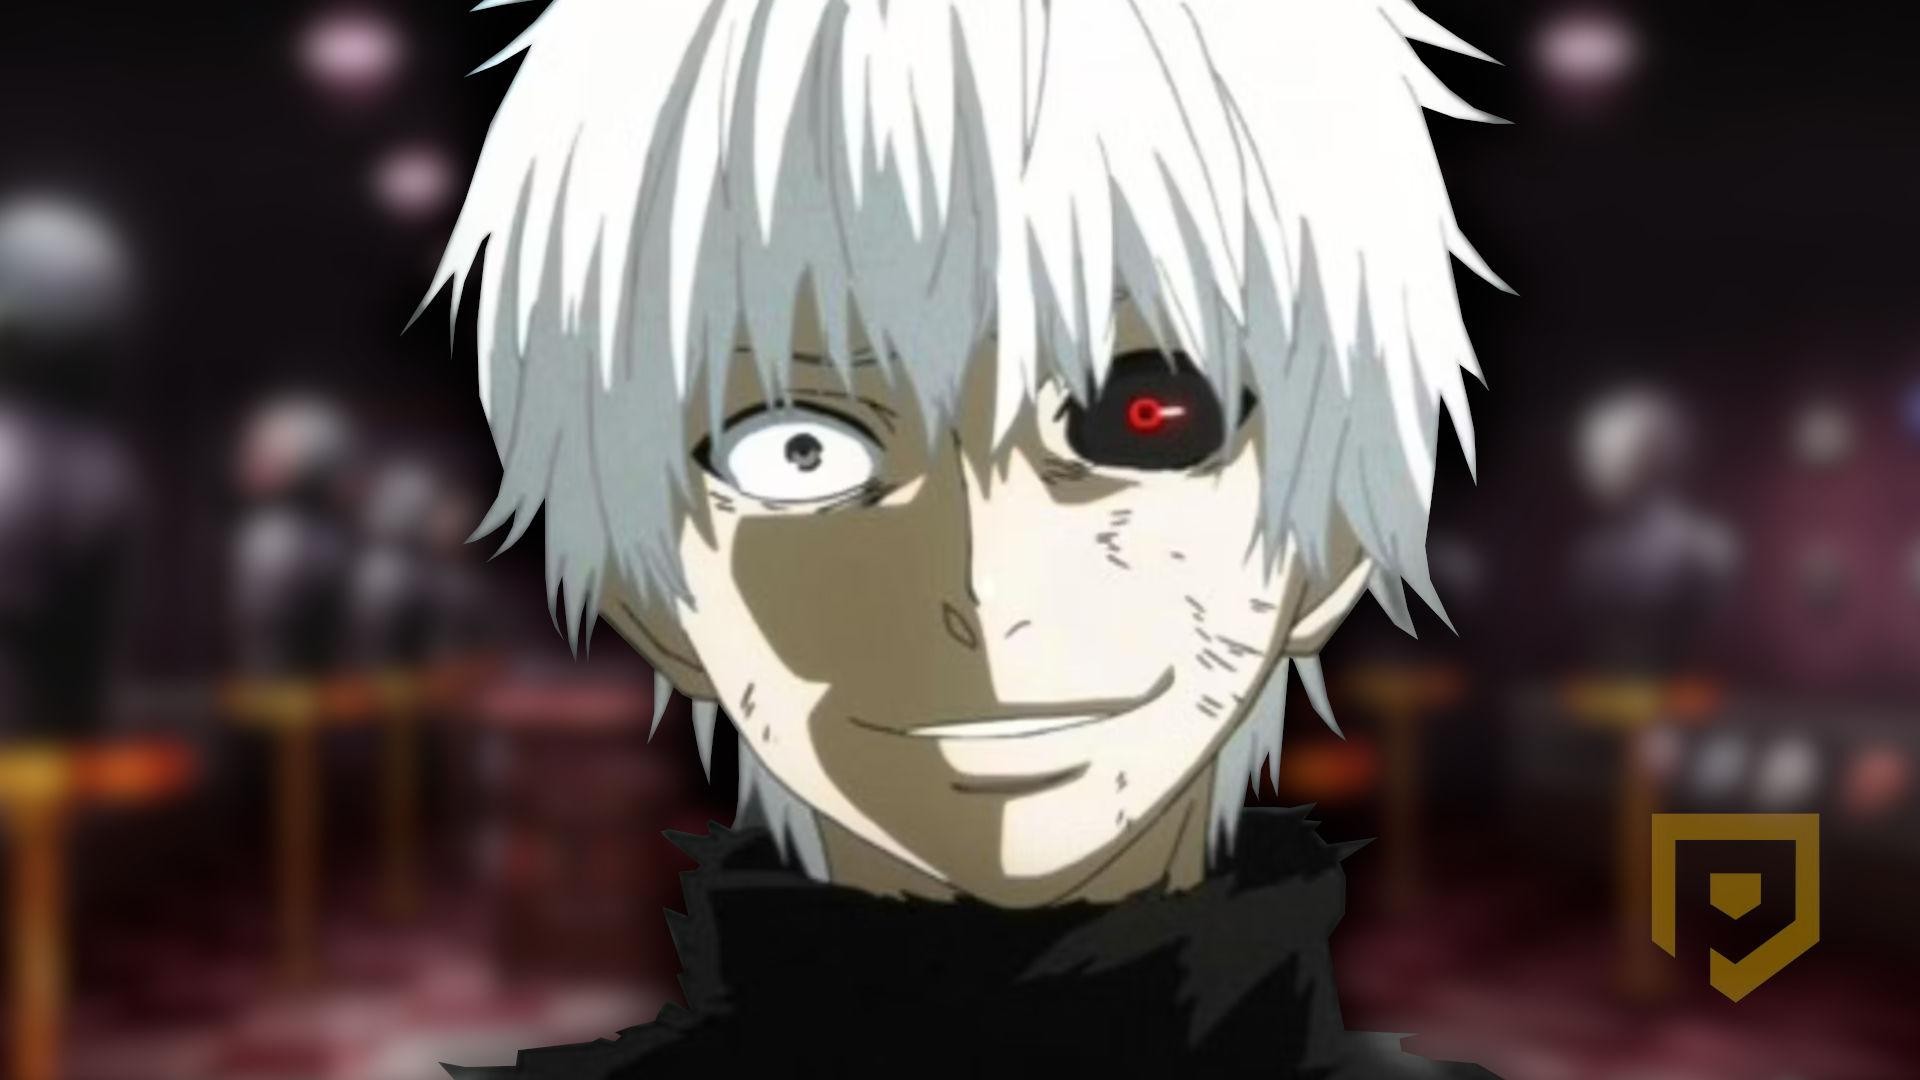 Tokyo Ghoul - Have you pre-registered for Tokyo Ghoul